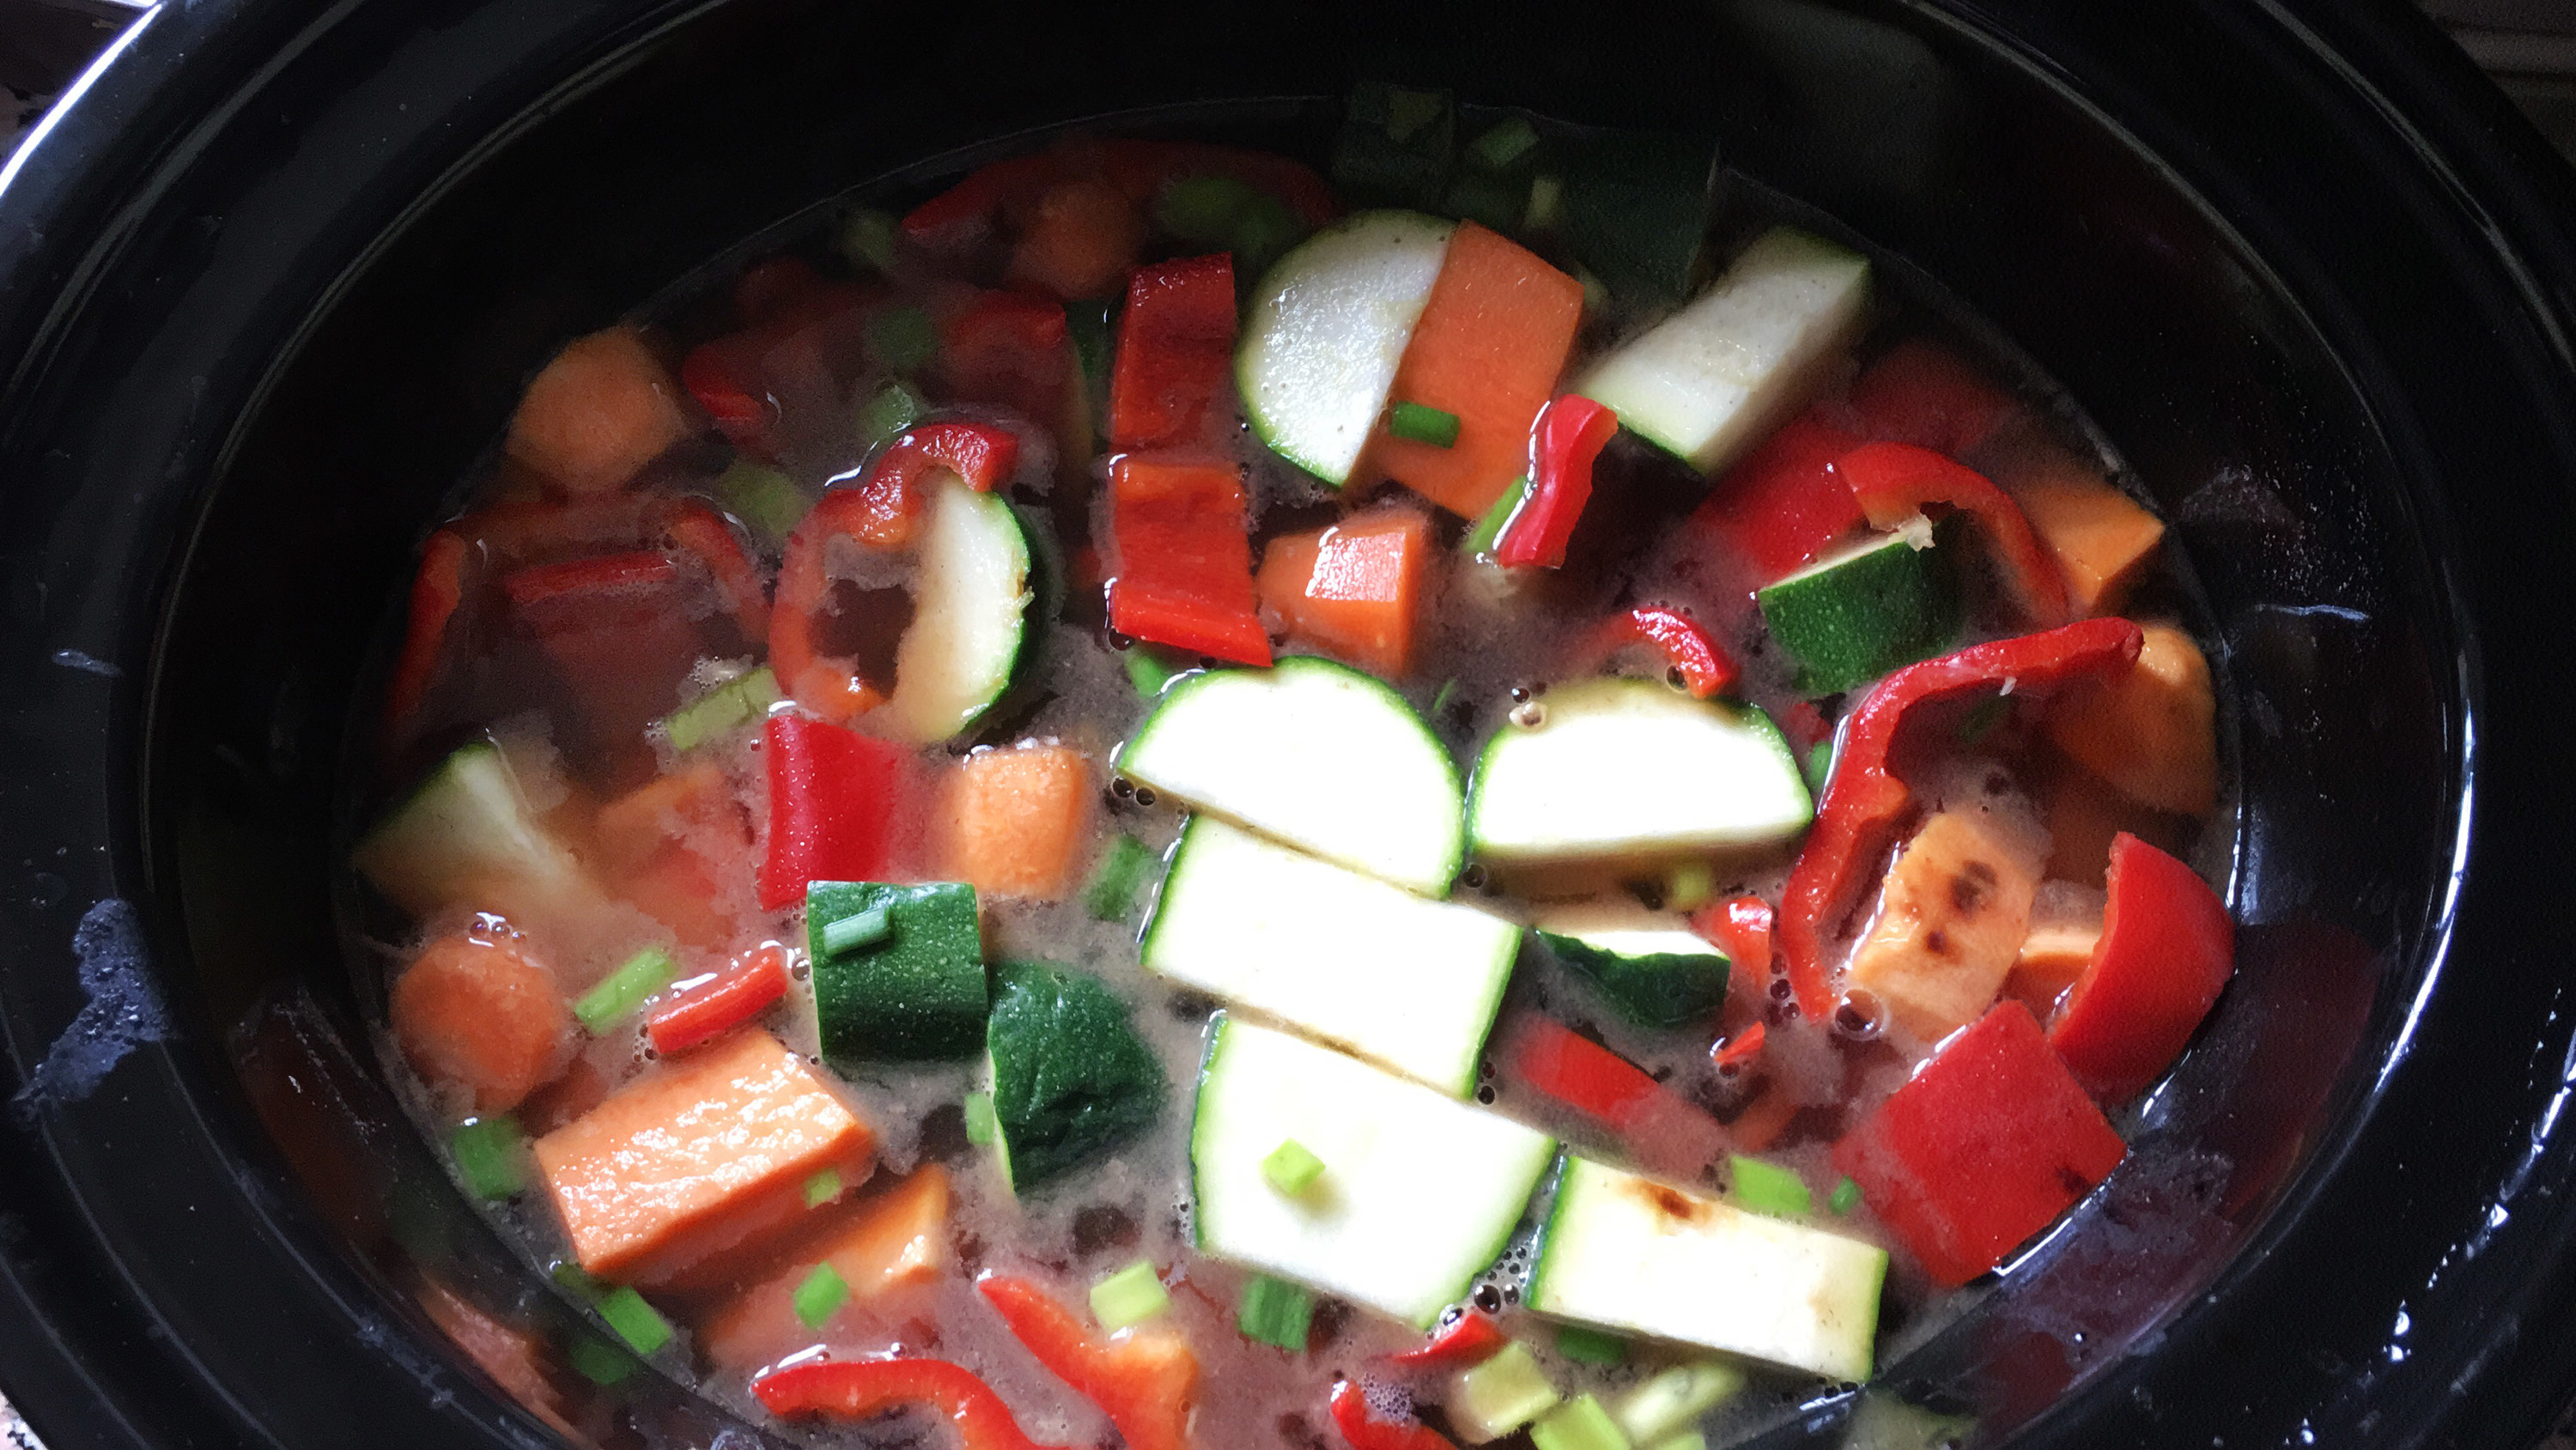 Vegetables cooking in the slow cooker.